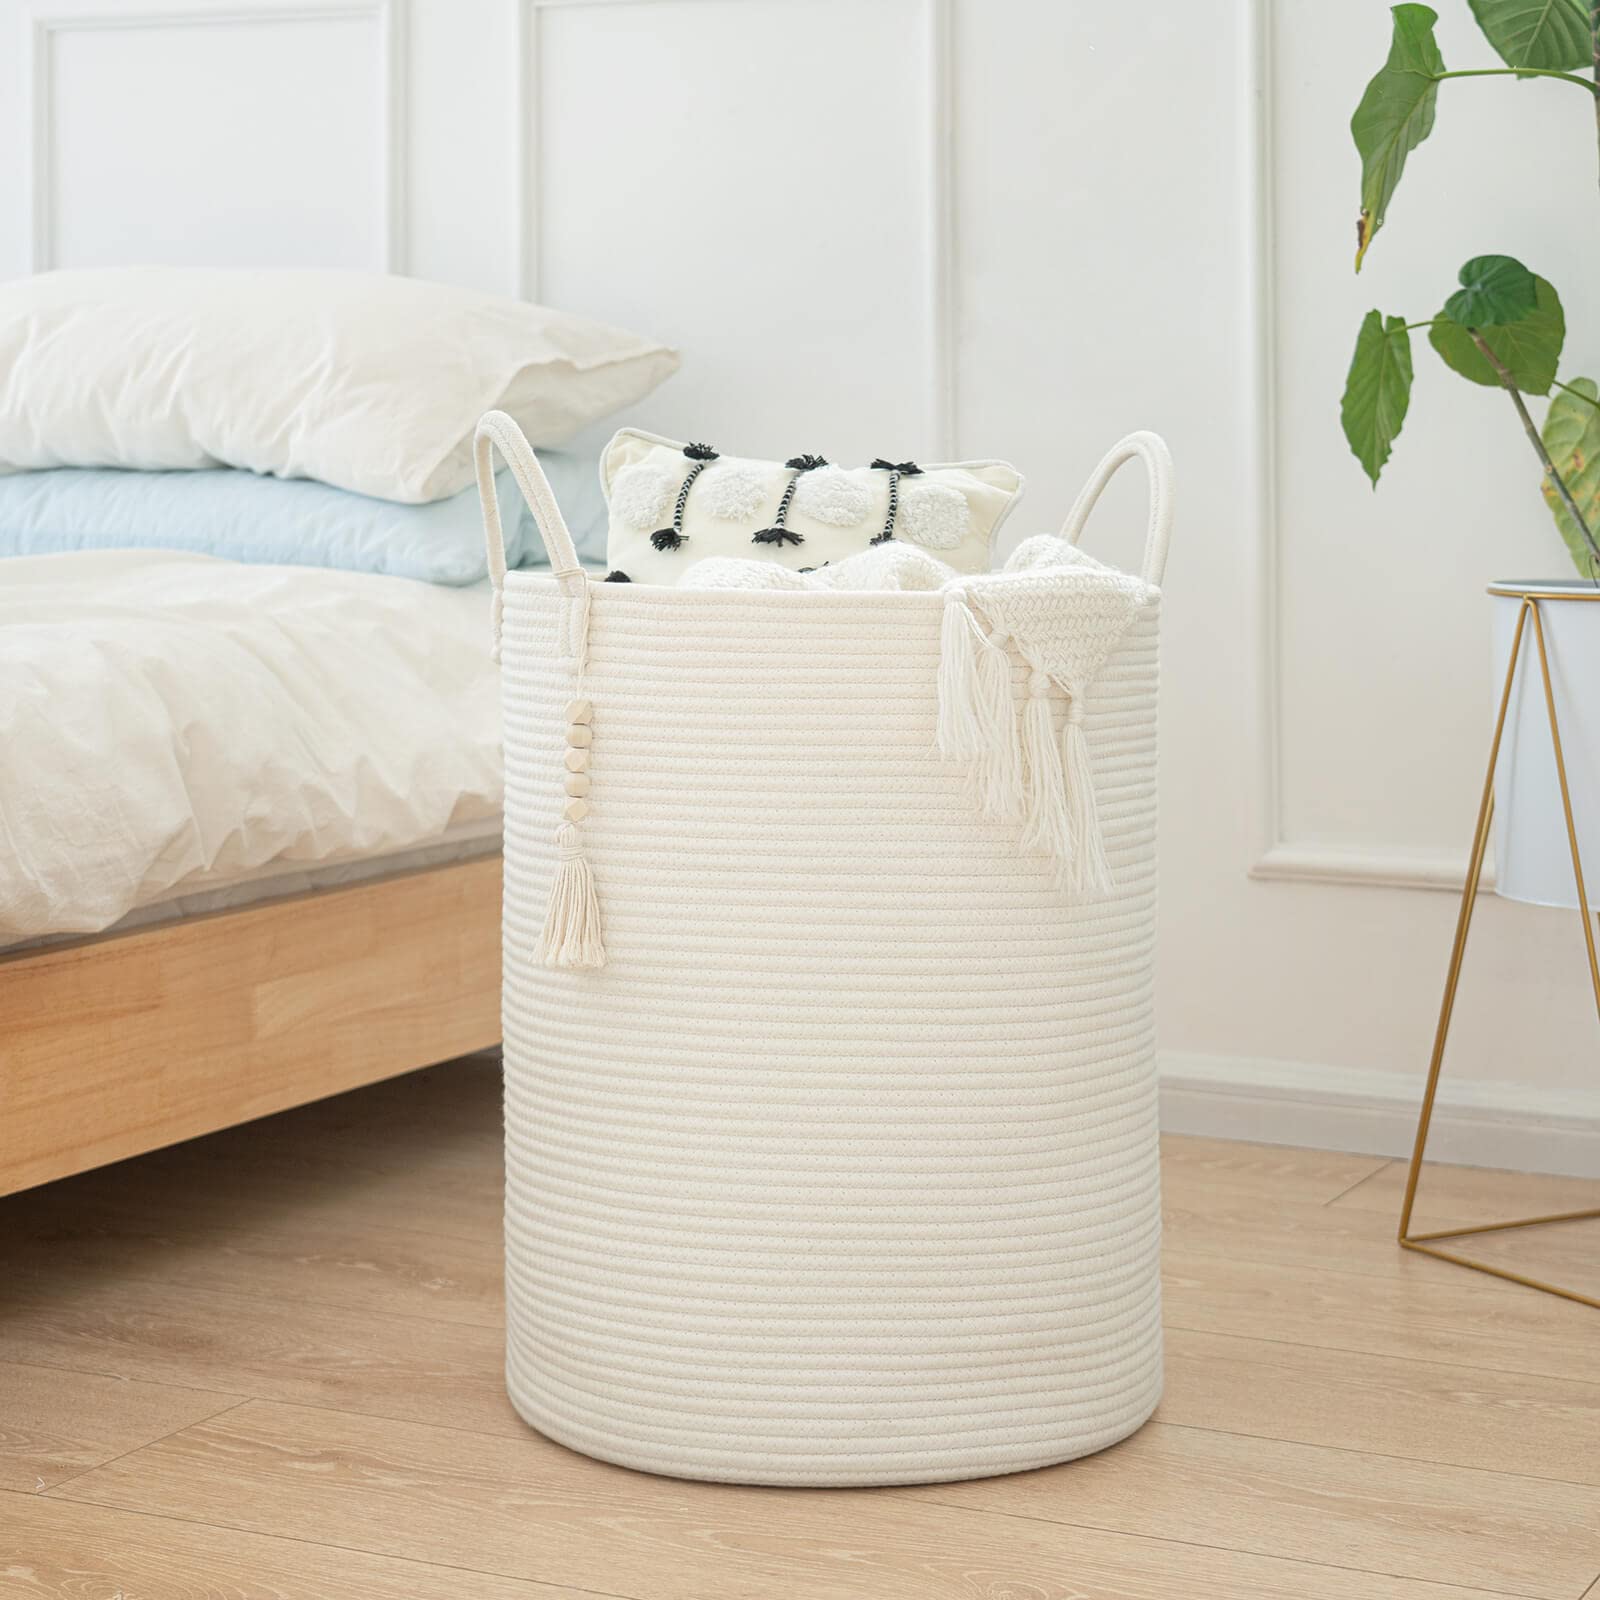 Goodpick White Tall Wicker Laundry Basket with handles